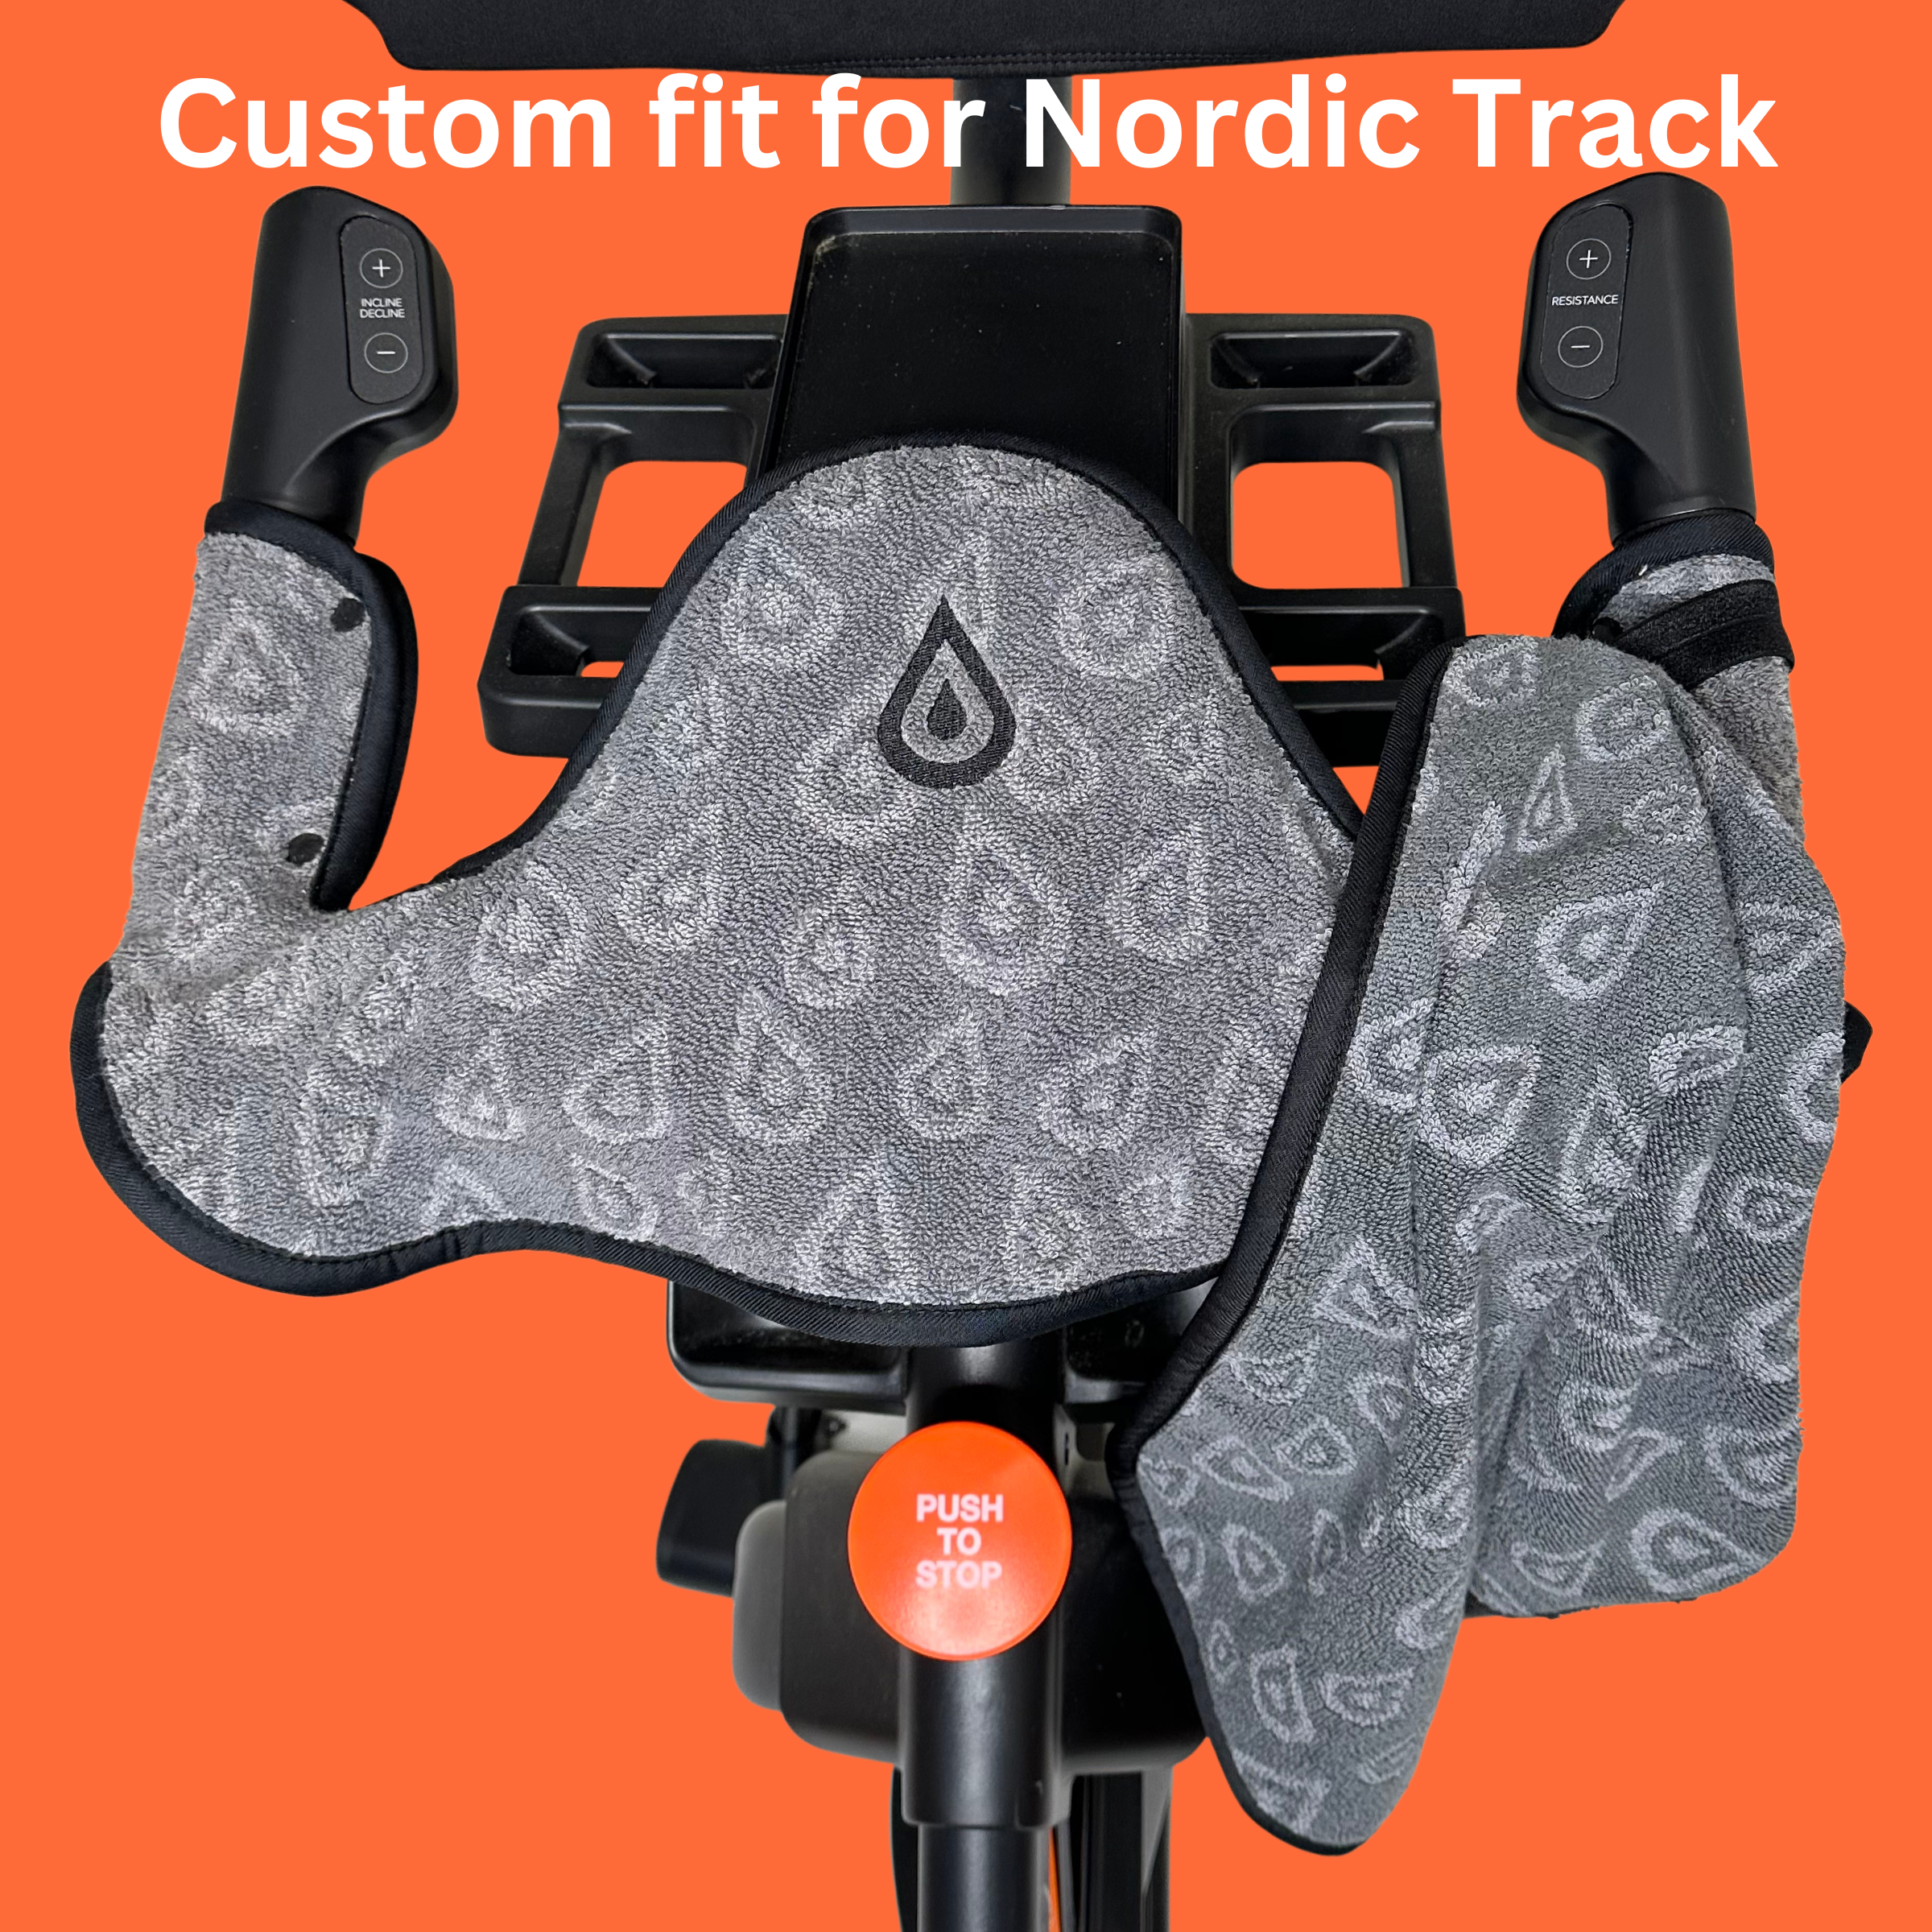 For use with Nordic Track